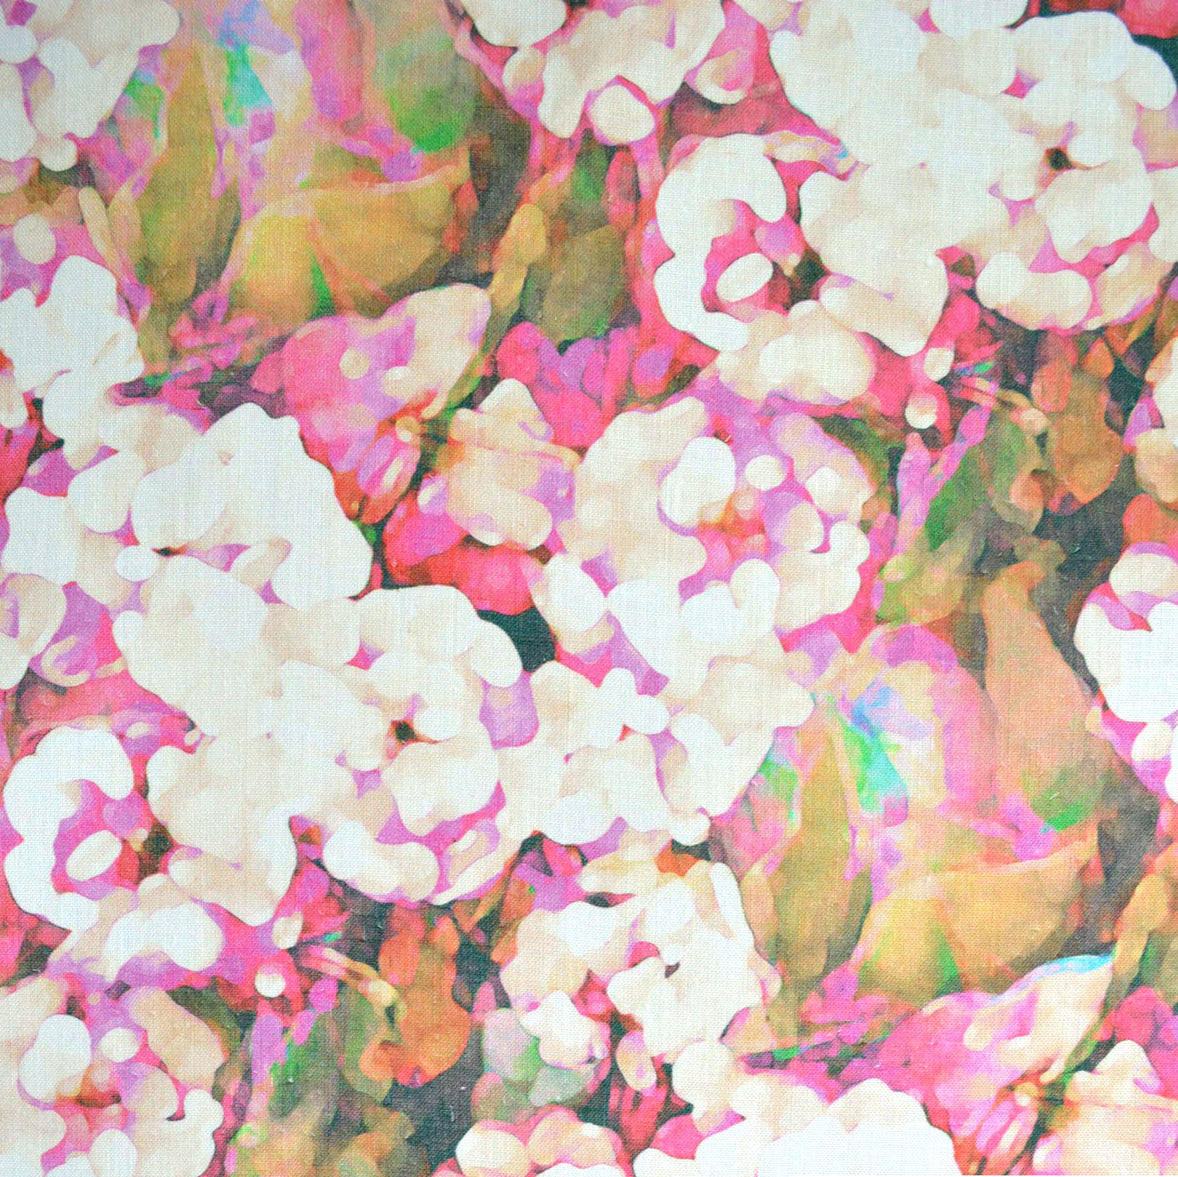 Detail of fabric in an abstract floral print in technicolor shades of pink, cream and green.